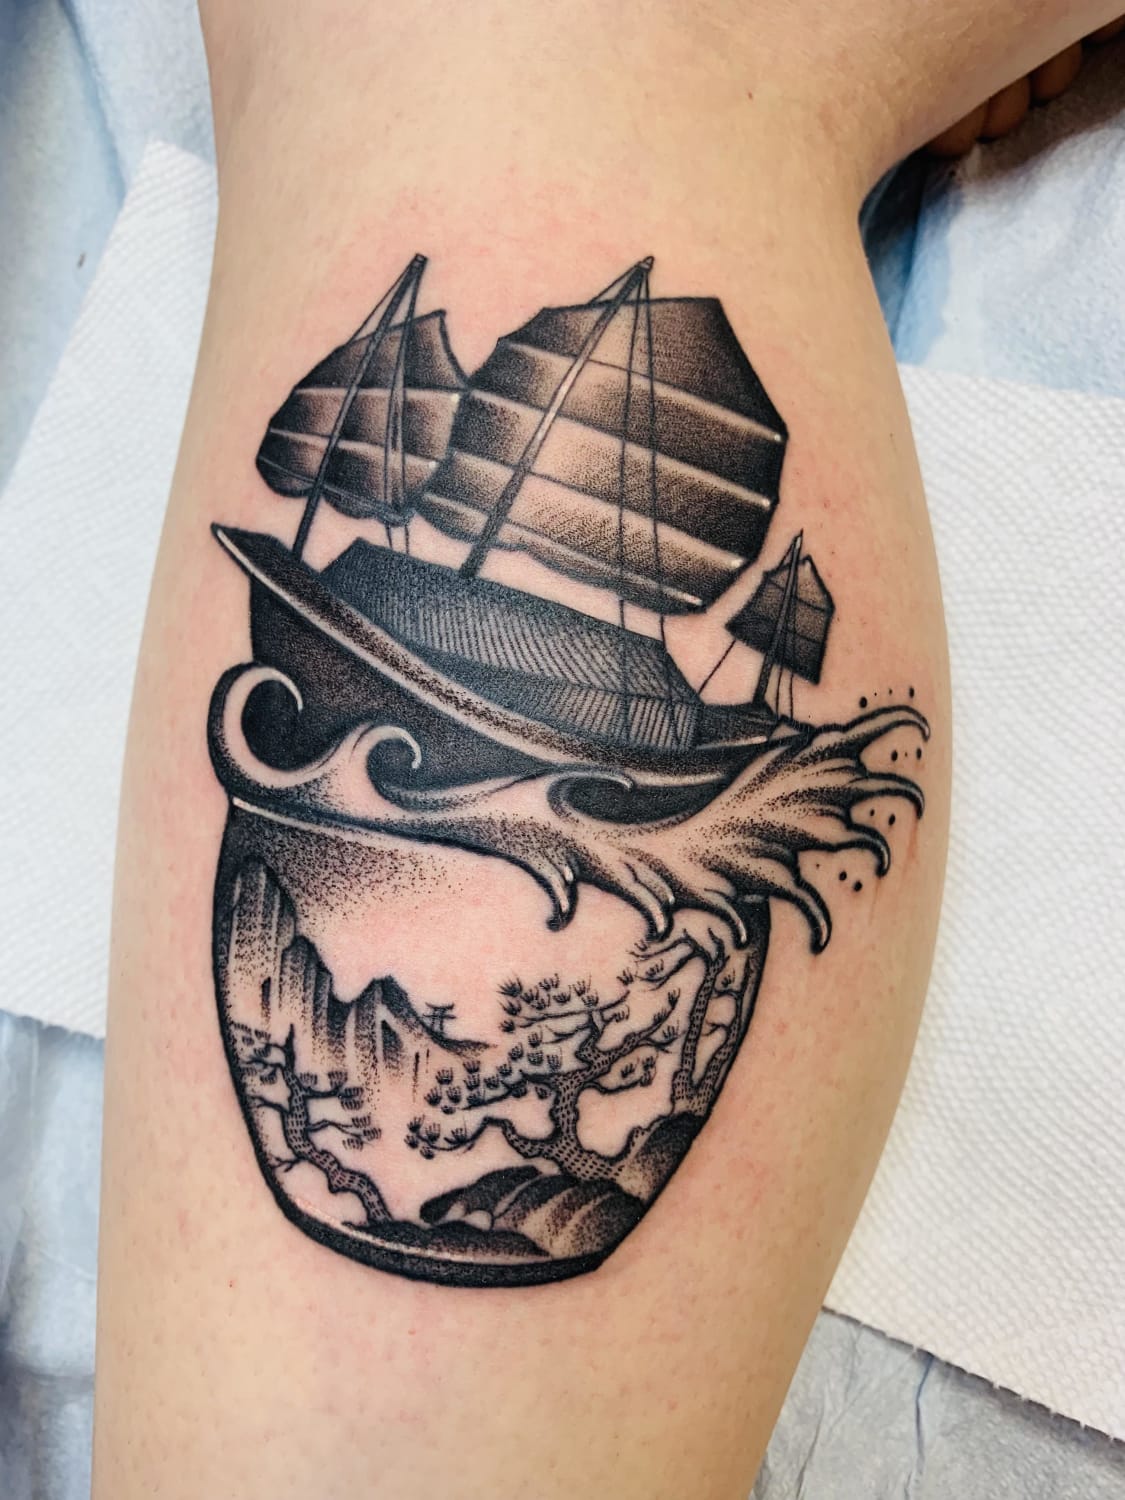 Ship in a tea cup tattoo designed by me, done by Harry Lau at Sovereign Tattoo, Portland Oregon